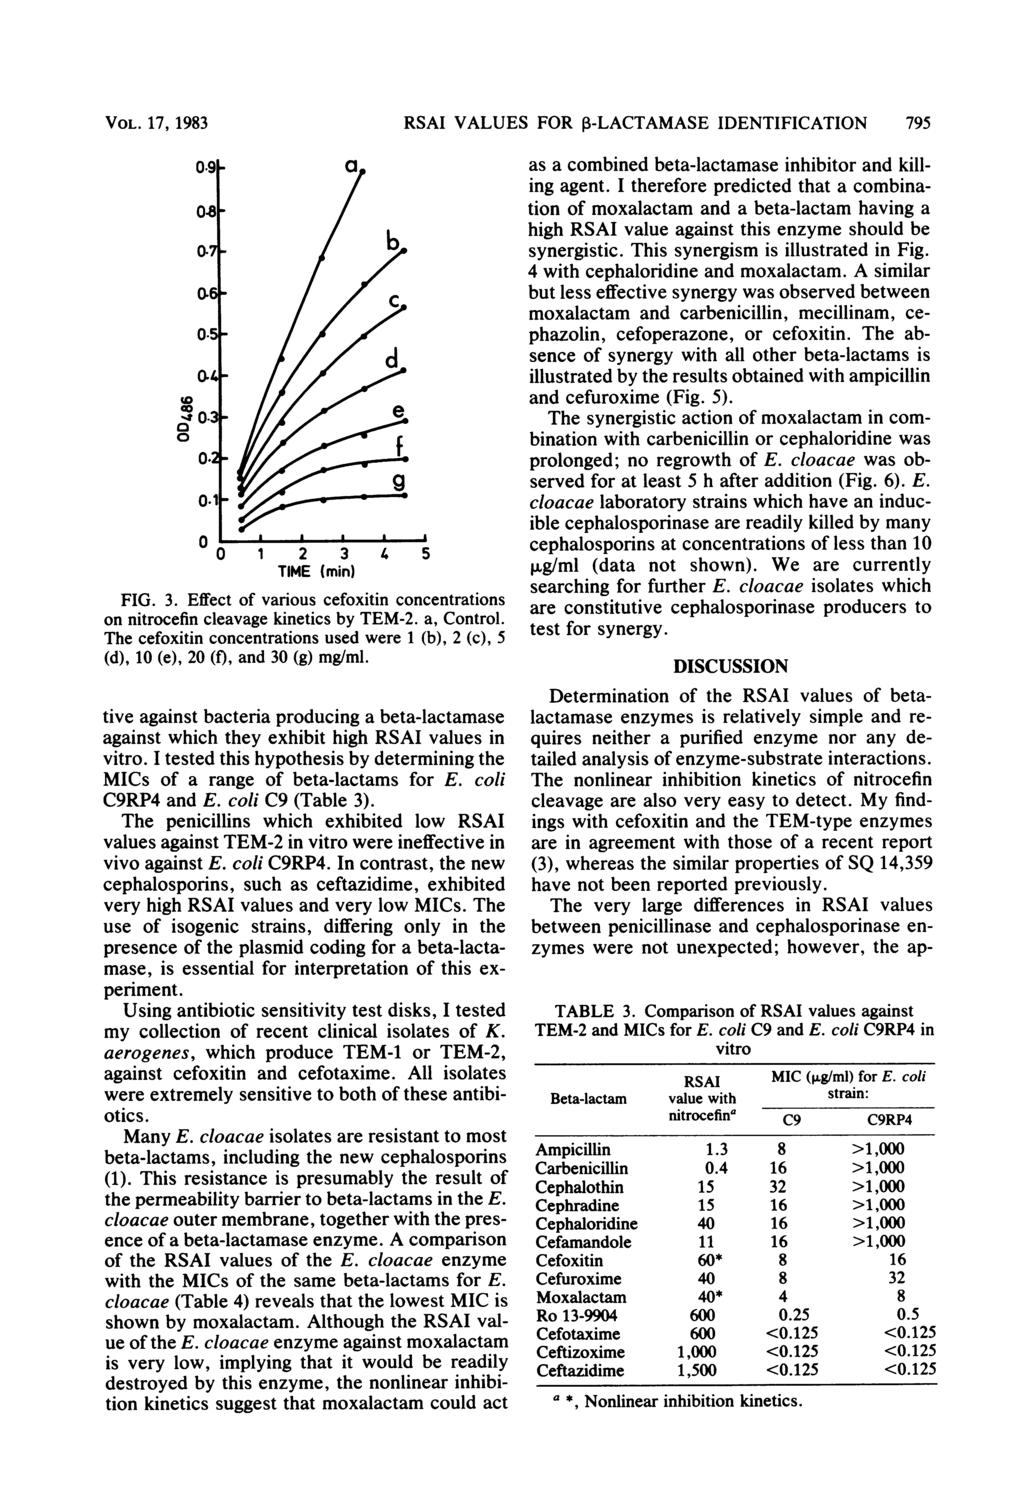 VOL. 17, 1983 D o -9F 48-.71 O*61.51 a4 21.1 L. 1 2 3 4 5 TIME (min) FIG. 3. Effect of various cefoxitin concentrations on nitrocefin cleavage kinetics by TEM-2. a, Control.